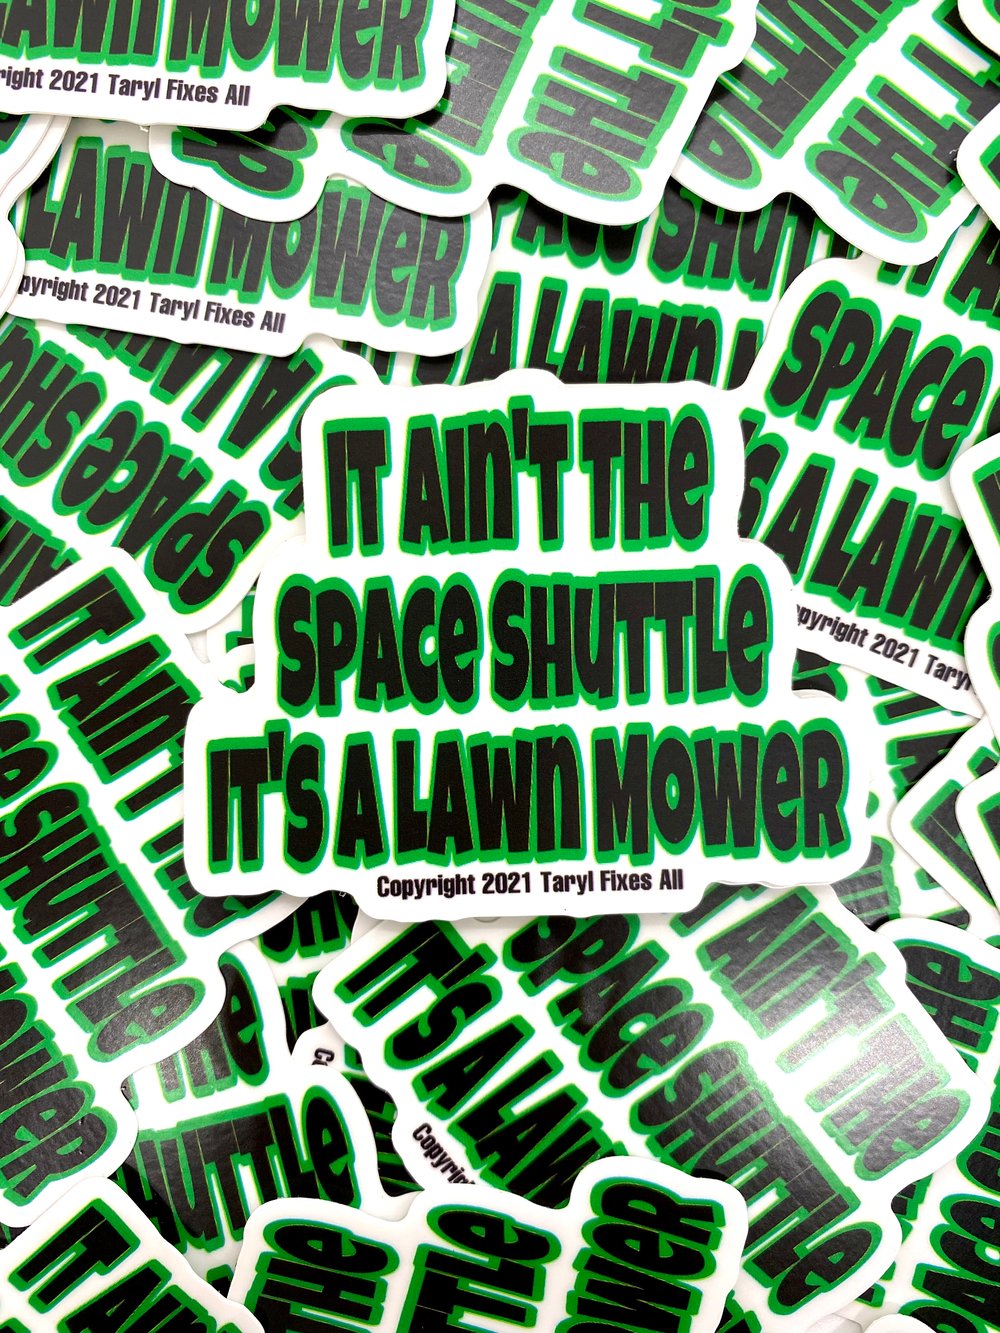 “It Ain’t The Space Shuttle” Stickers!! 